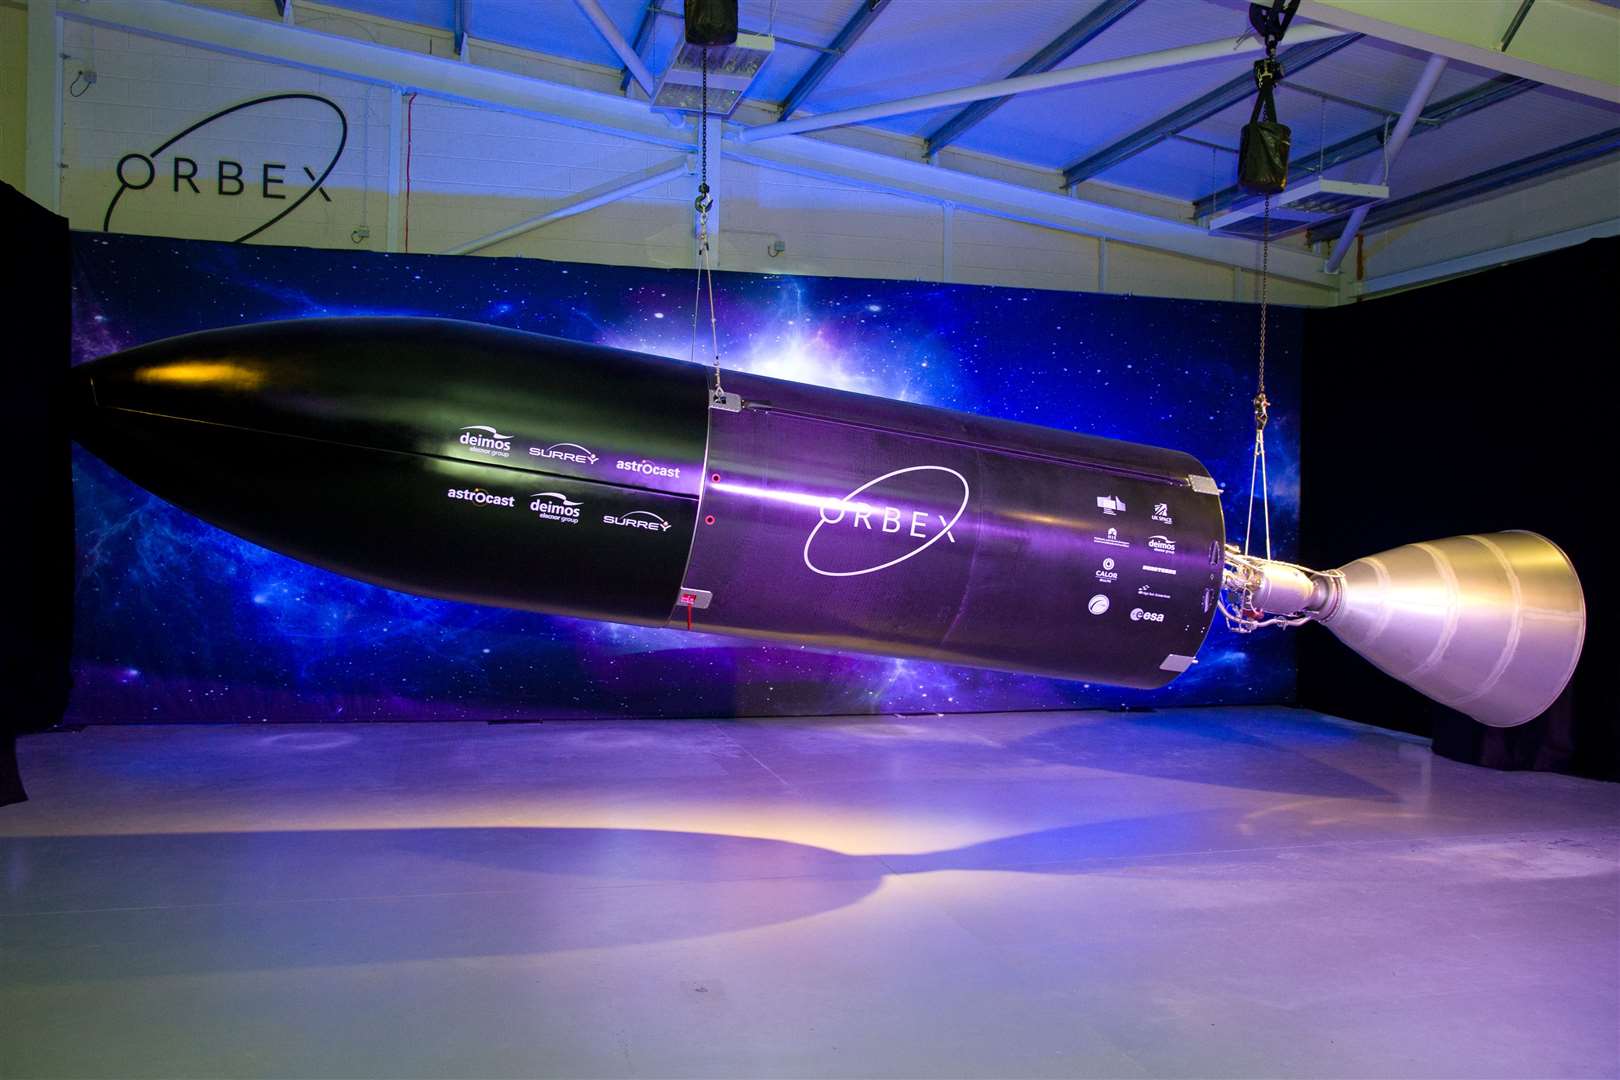 Interns will have the chance to be involved with the launch of Orbex's Prime Rocket. Picture: Daniel Forsyth